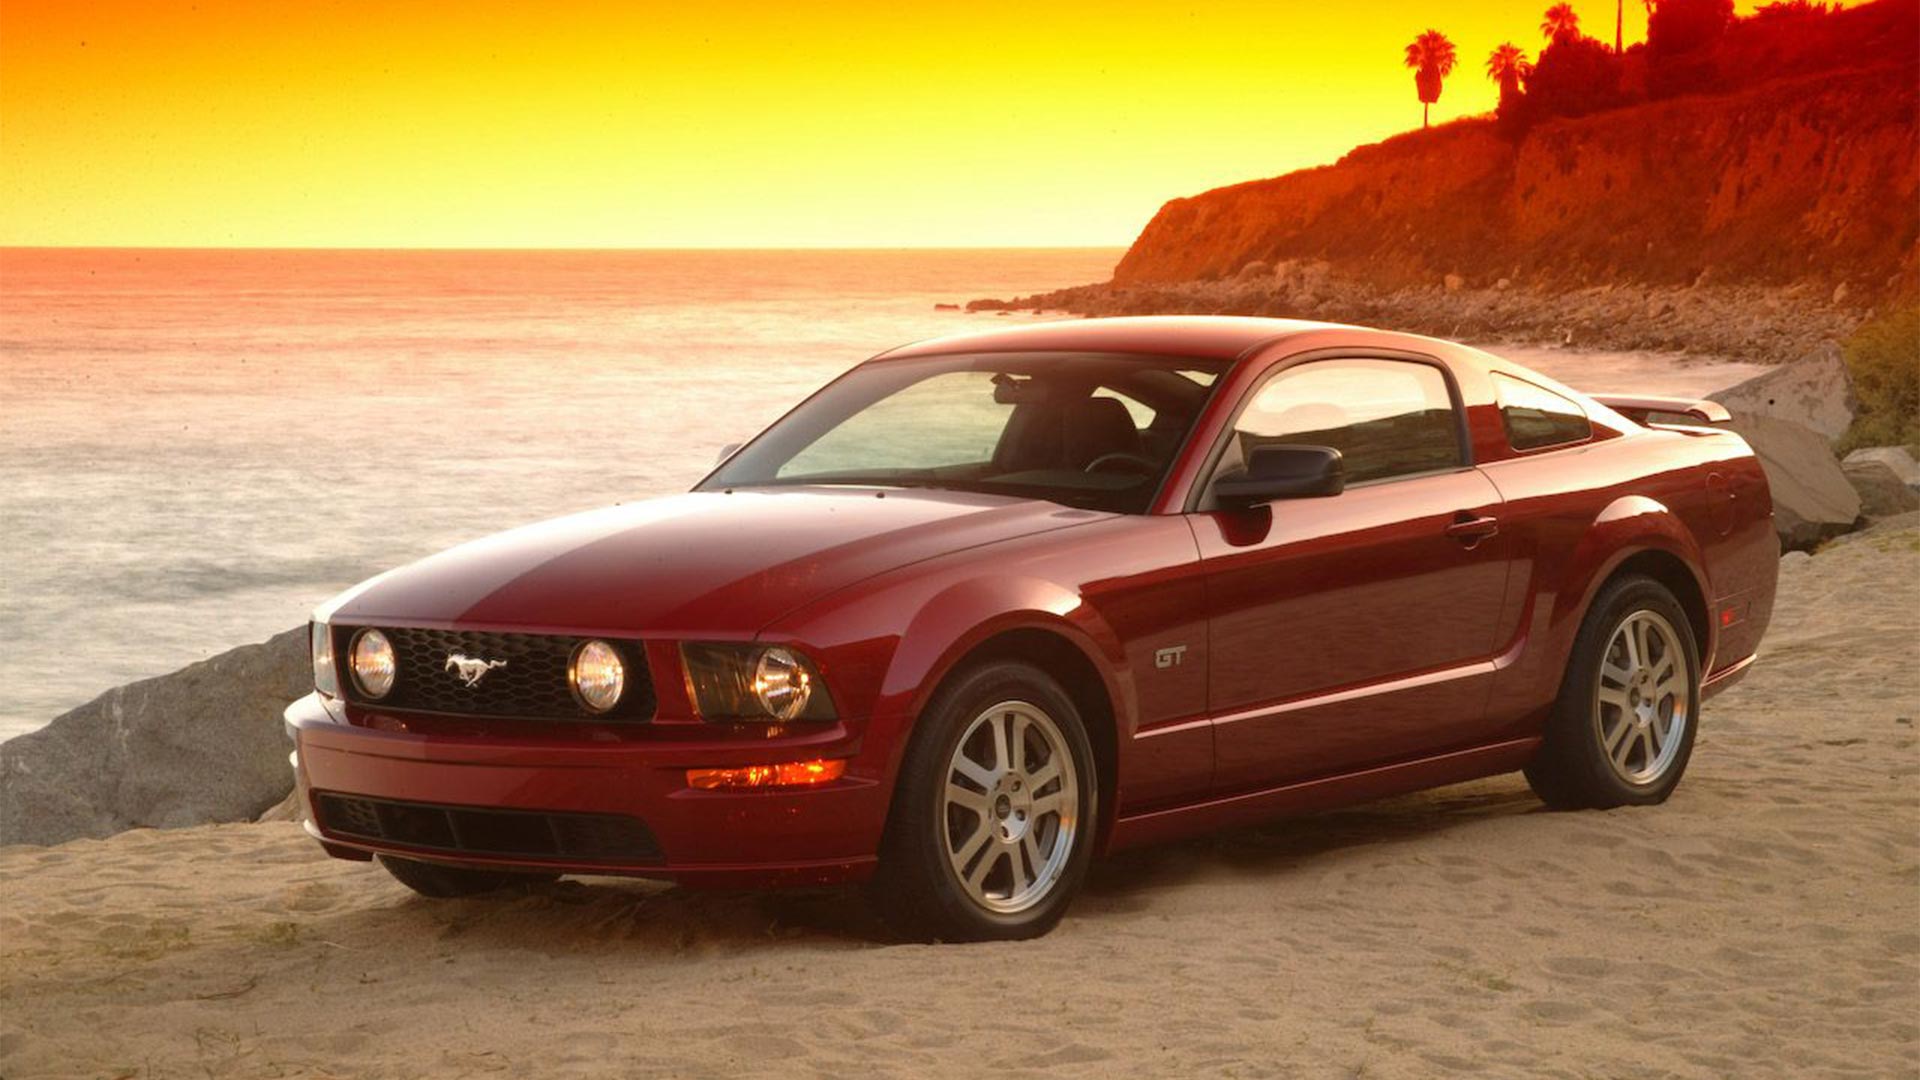 Image of a model year 2005 to 2009 Ford Mustang